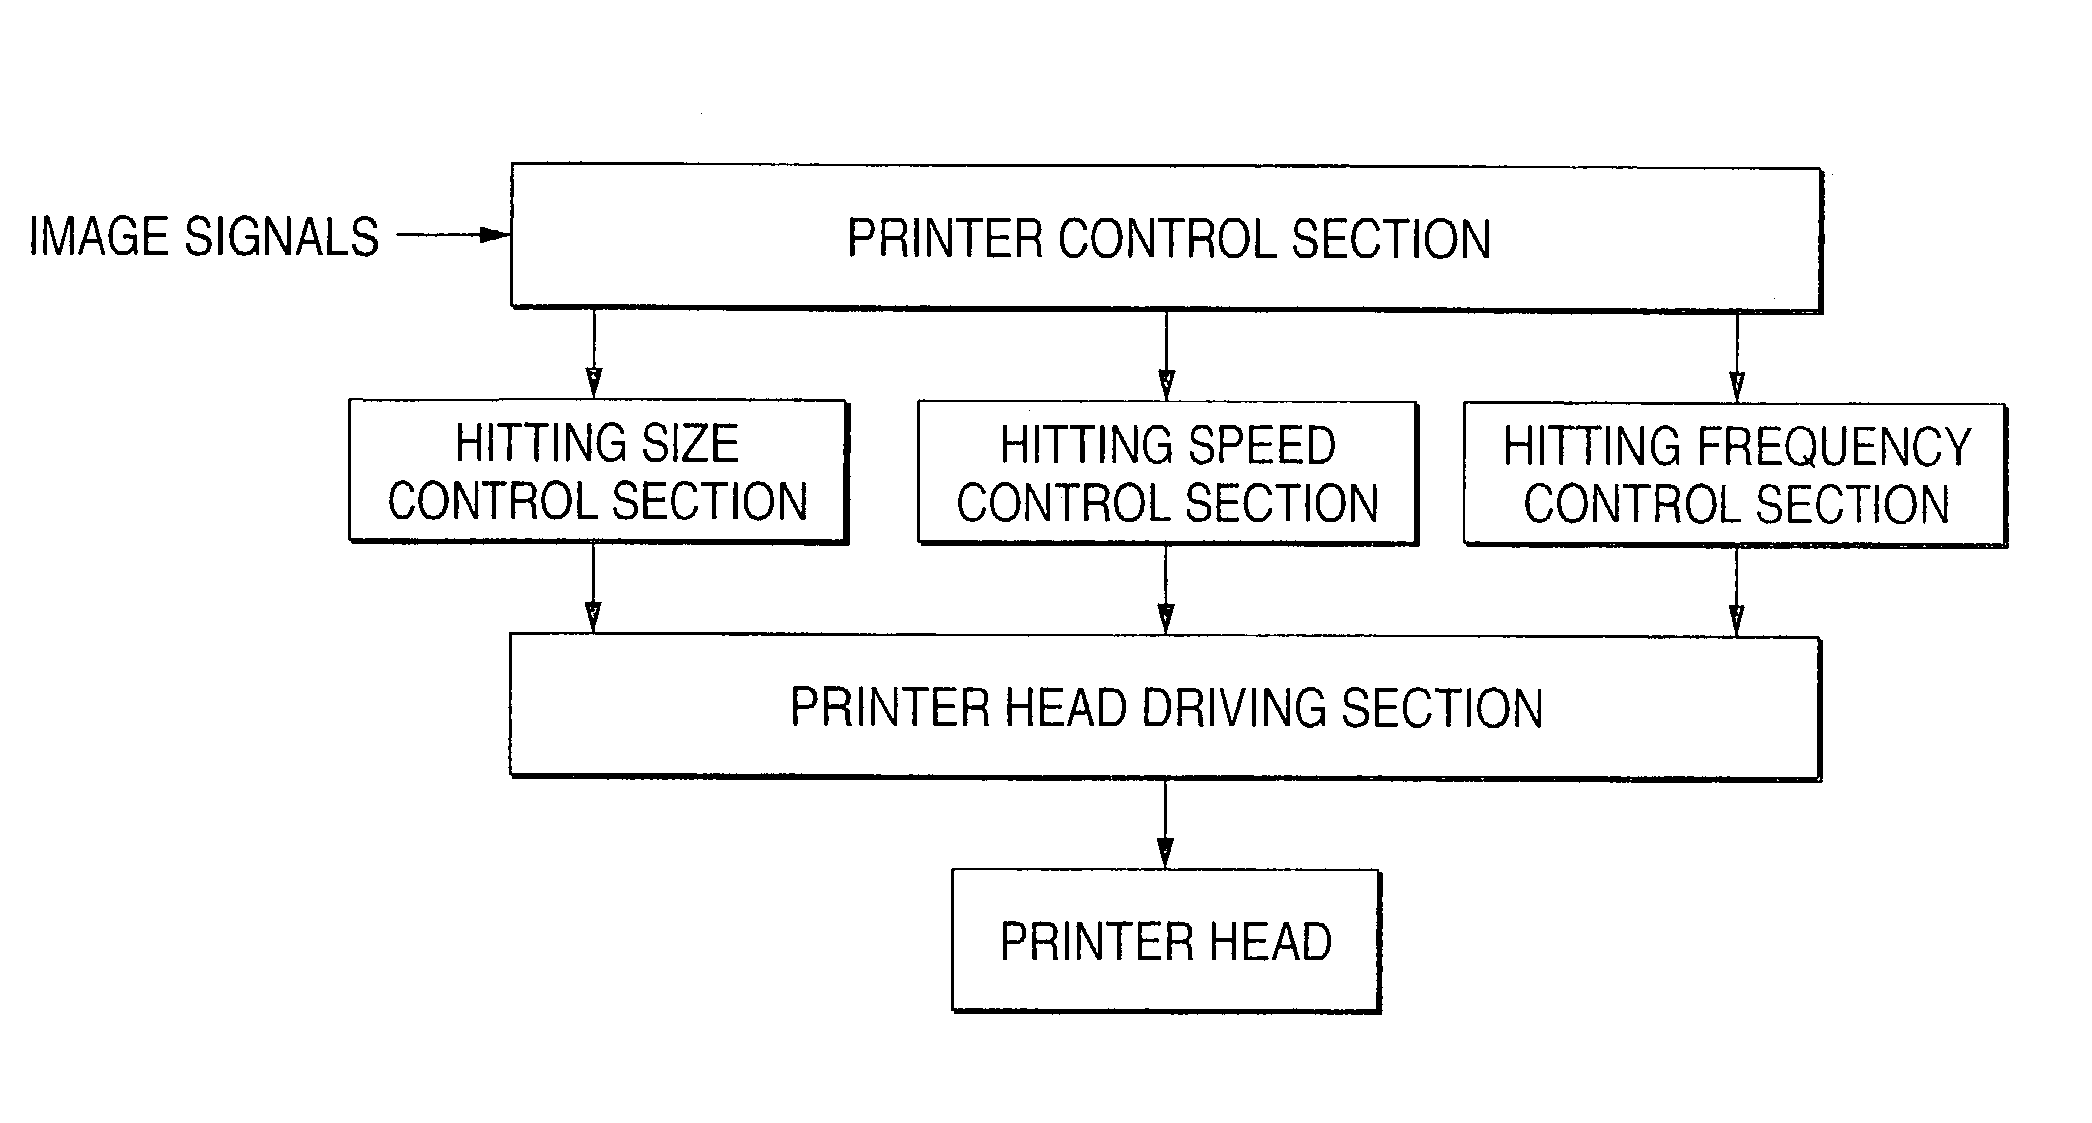 Ink jet image recording method and apparatus using the method